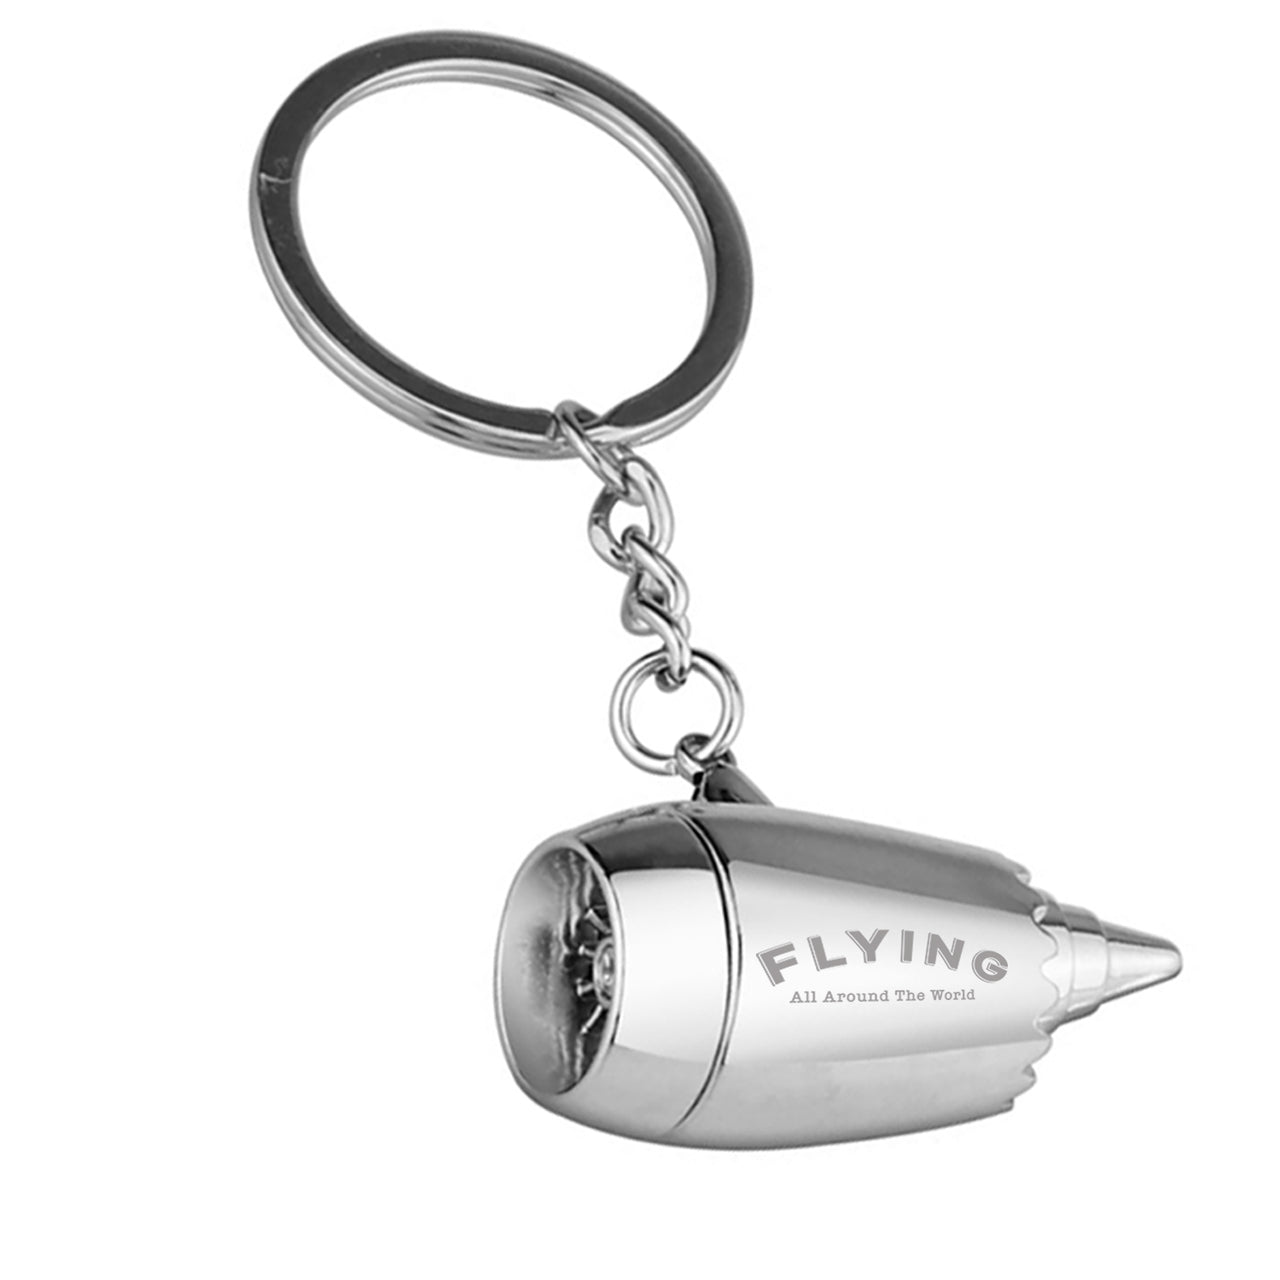 Flying All Around The World Designed Airplane Jet Engine Shaped Key Chain